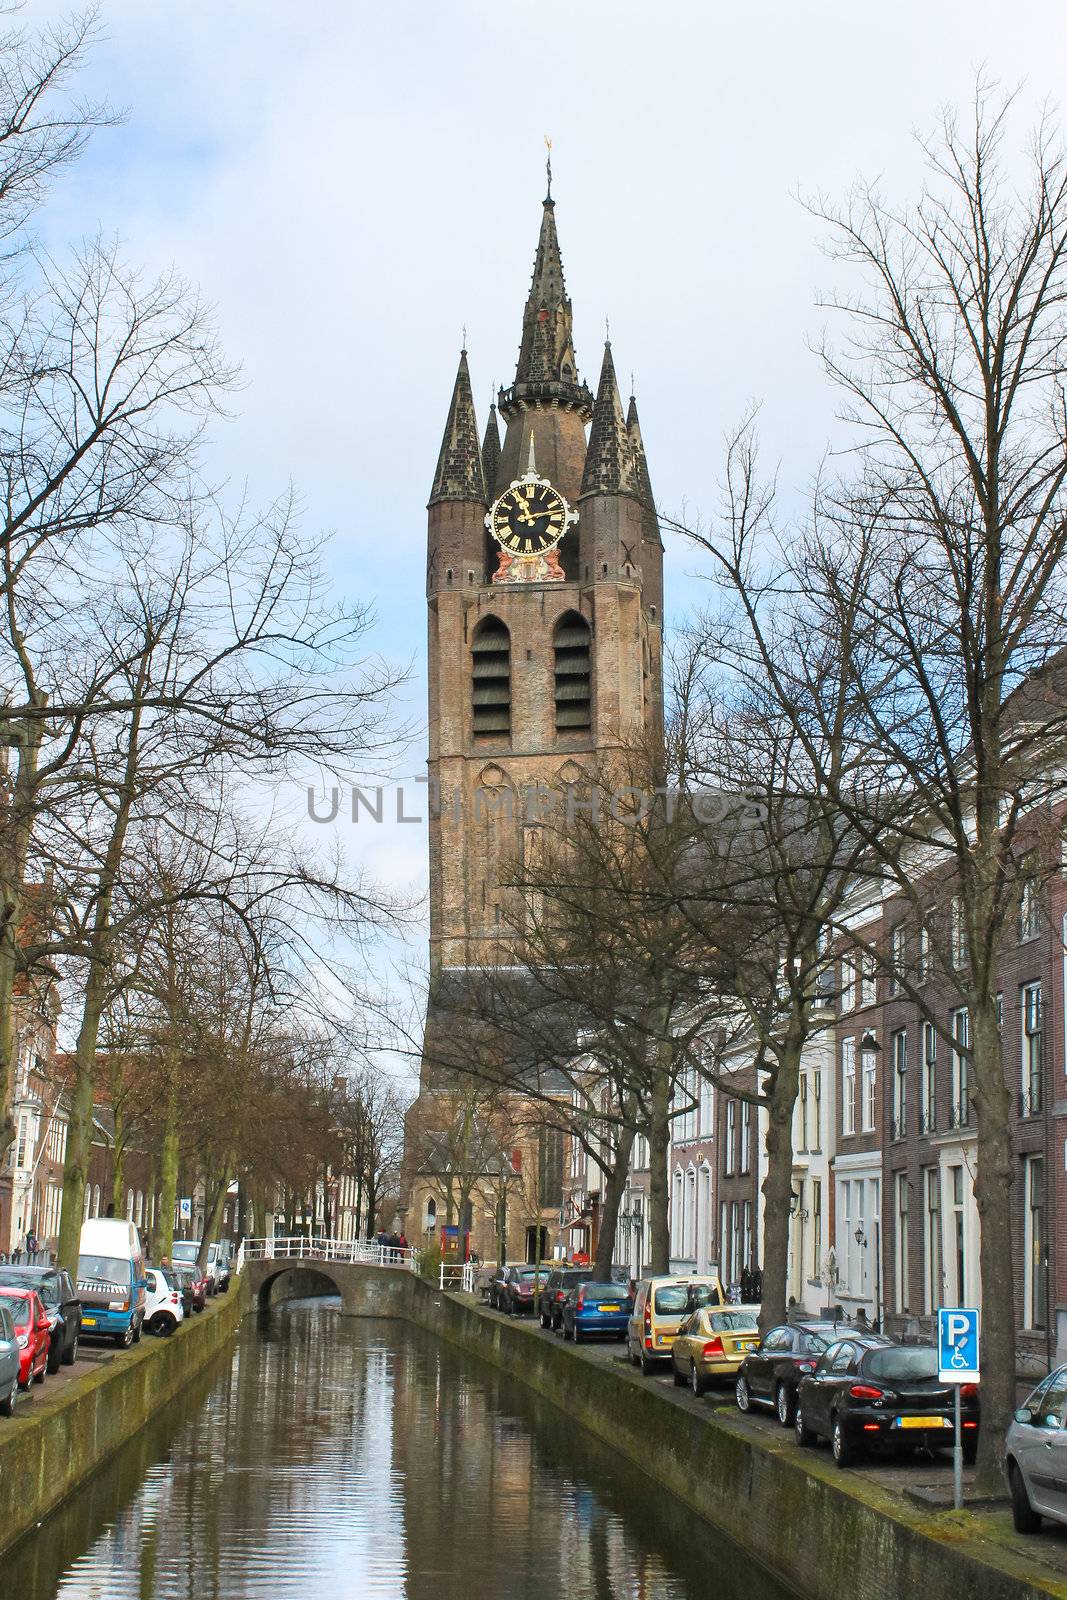 Canal and church tower in Delft, Netherlands by NickNick